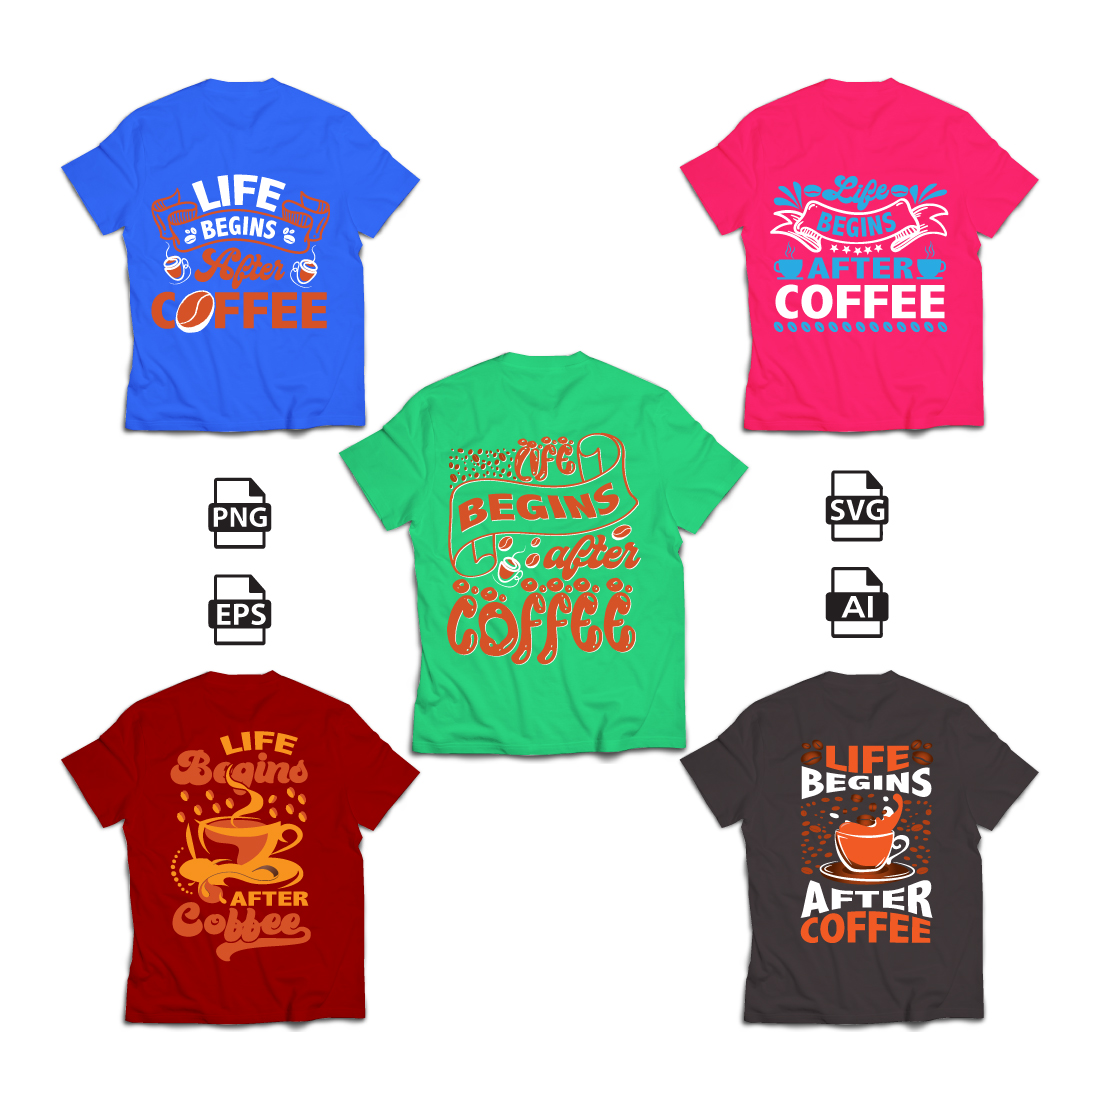 Life Begins After Coffee Typography T-Shirt Design cover image.